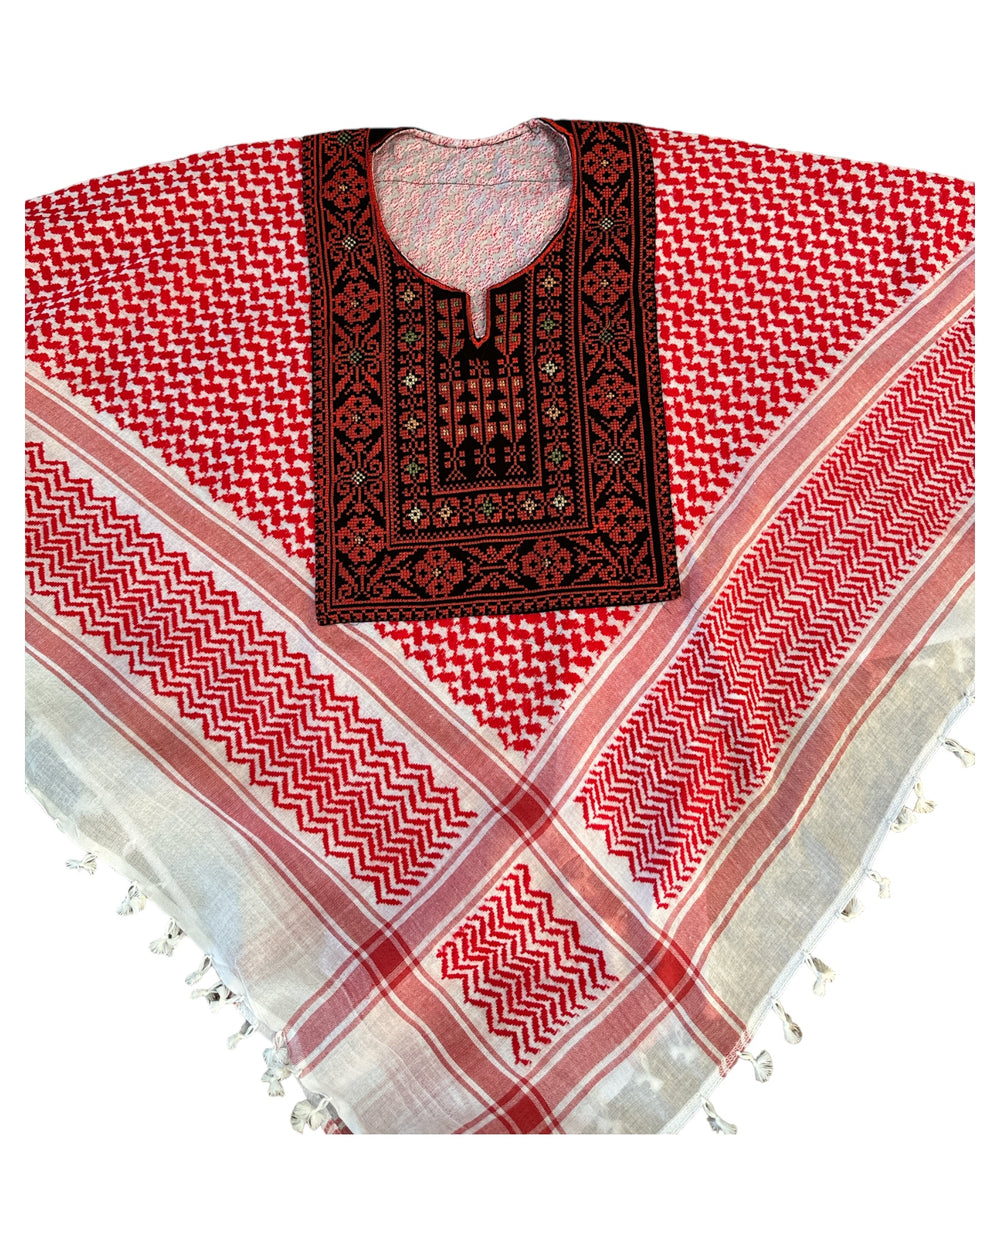 Hand Stitched Red & White Poncho with Keffiyeh design and Embroidery